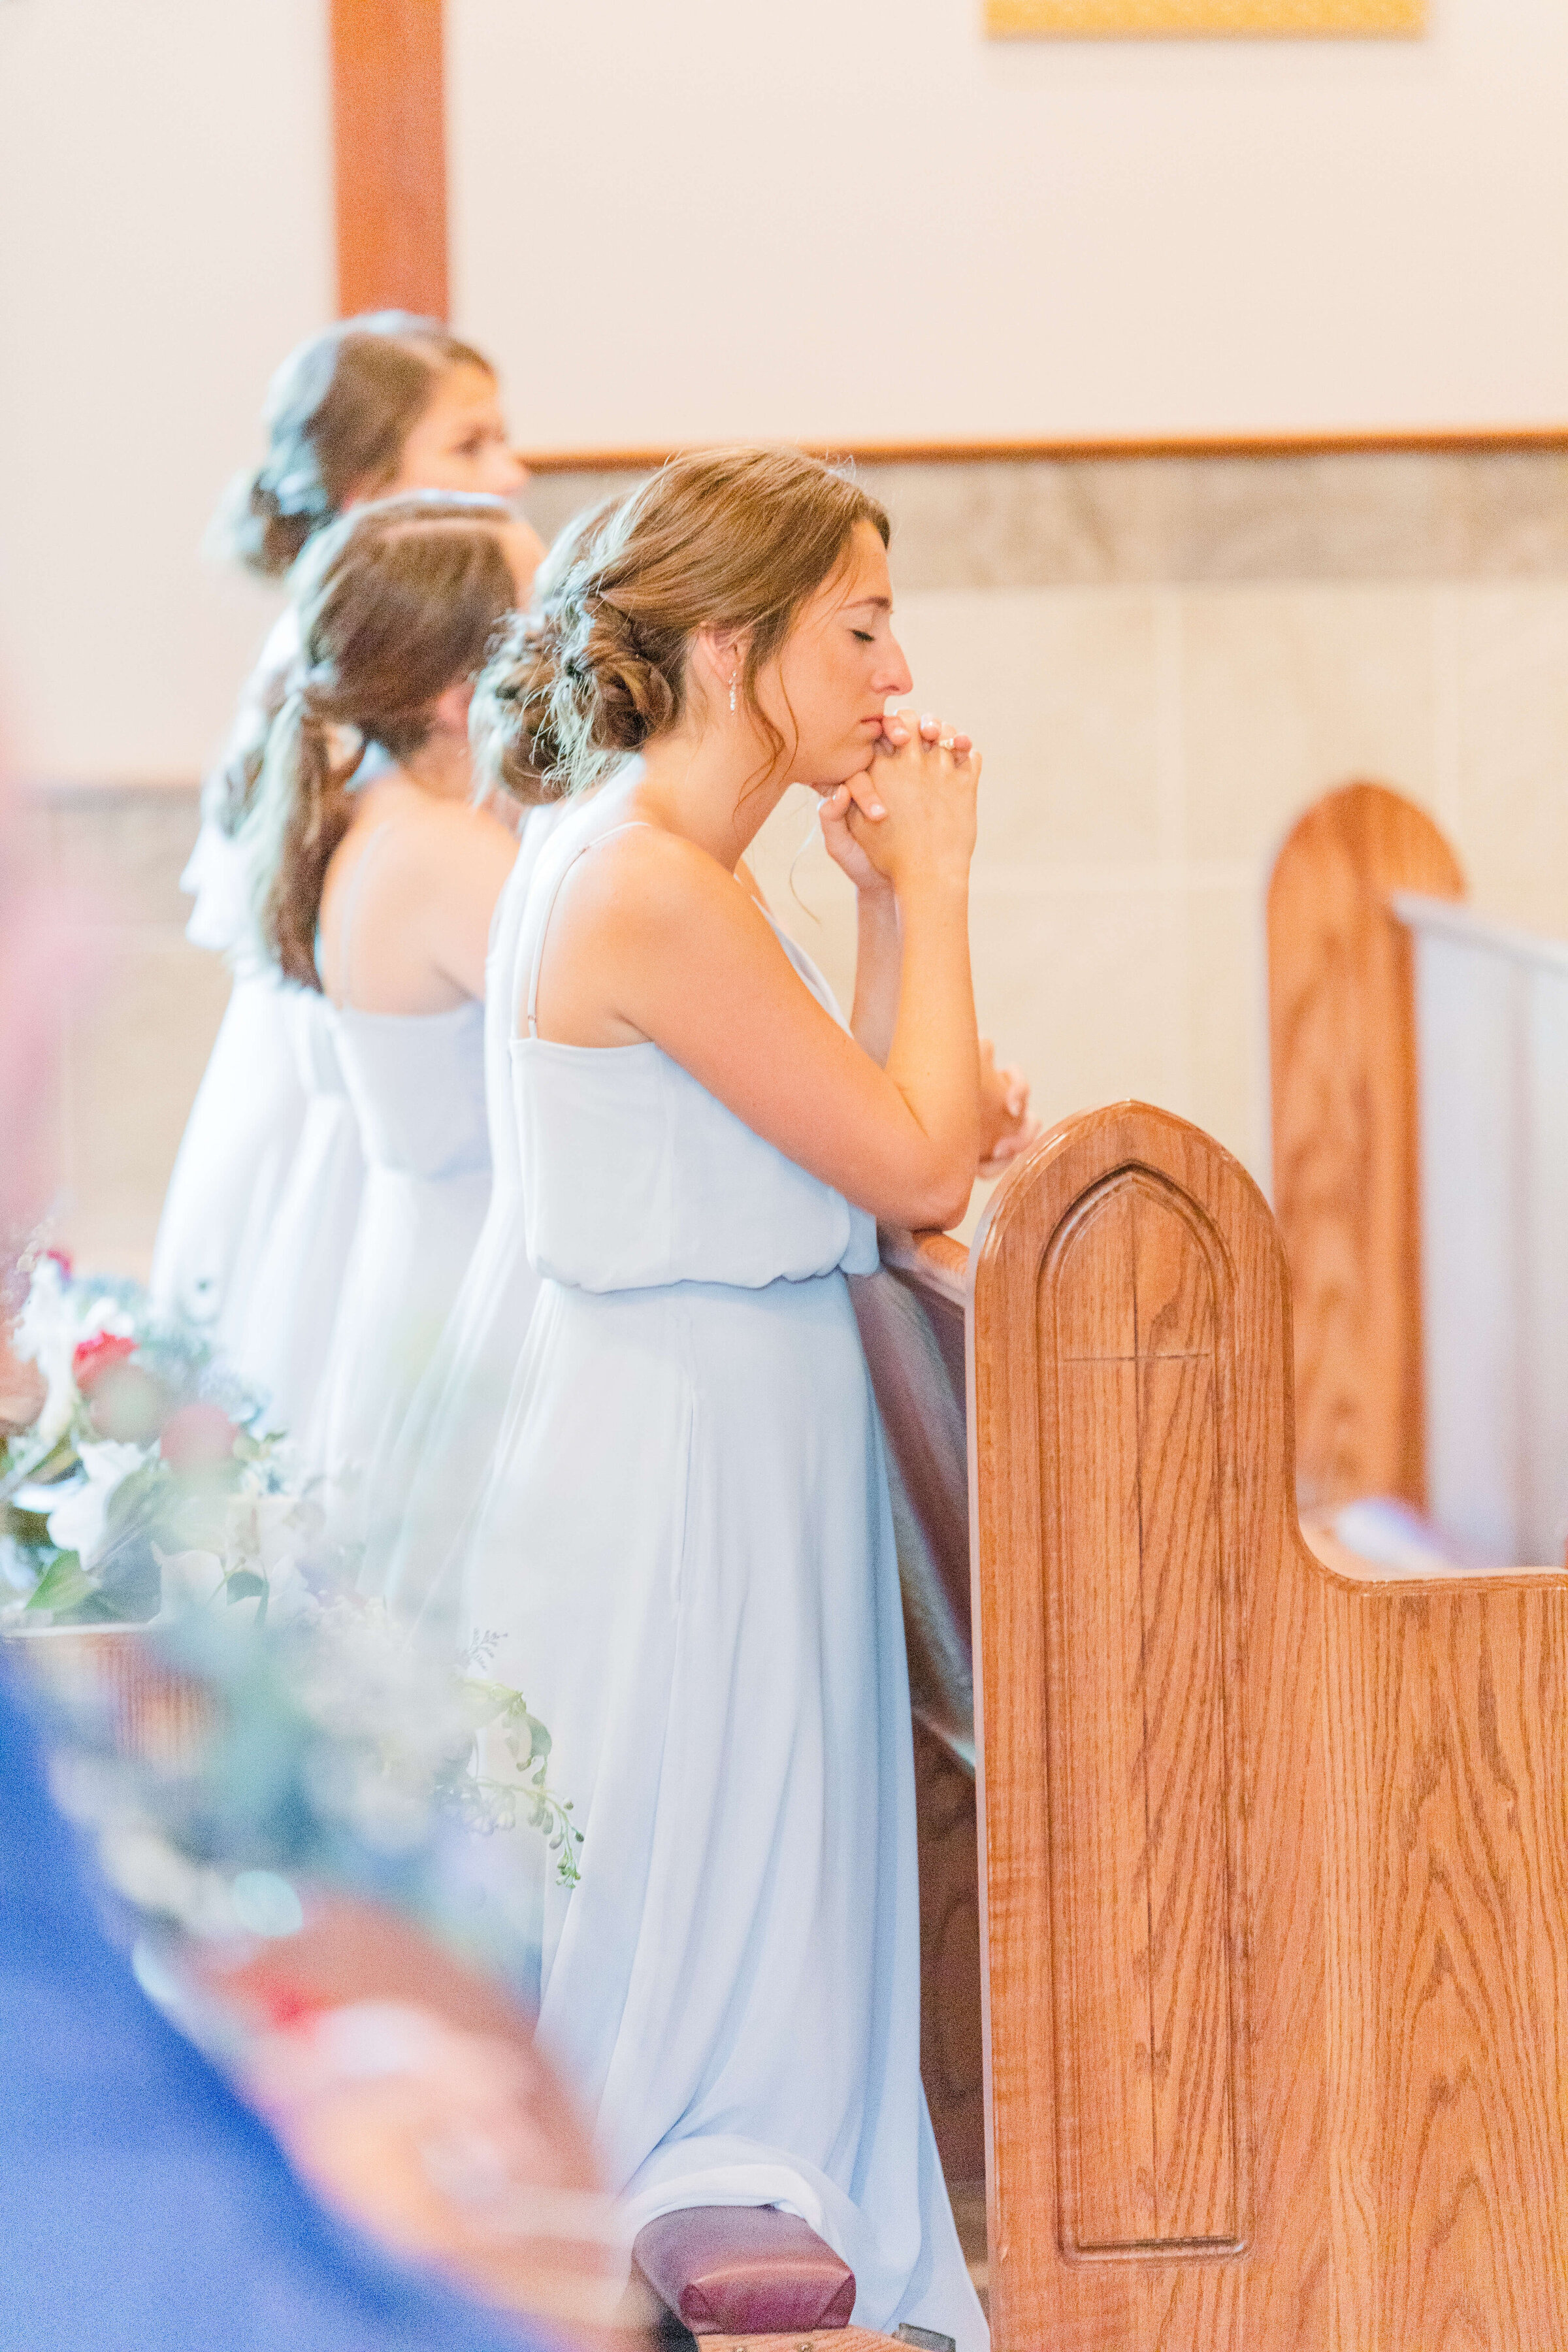 An up close photograph of a bridesmaid in a blue dress praying in church